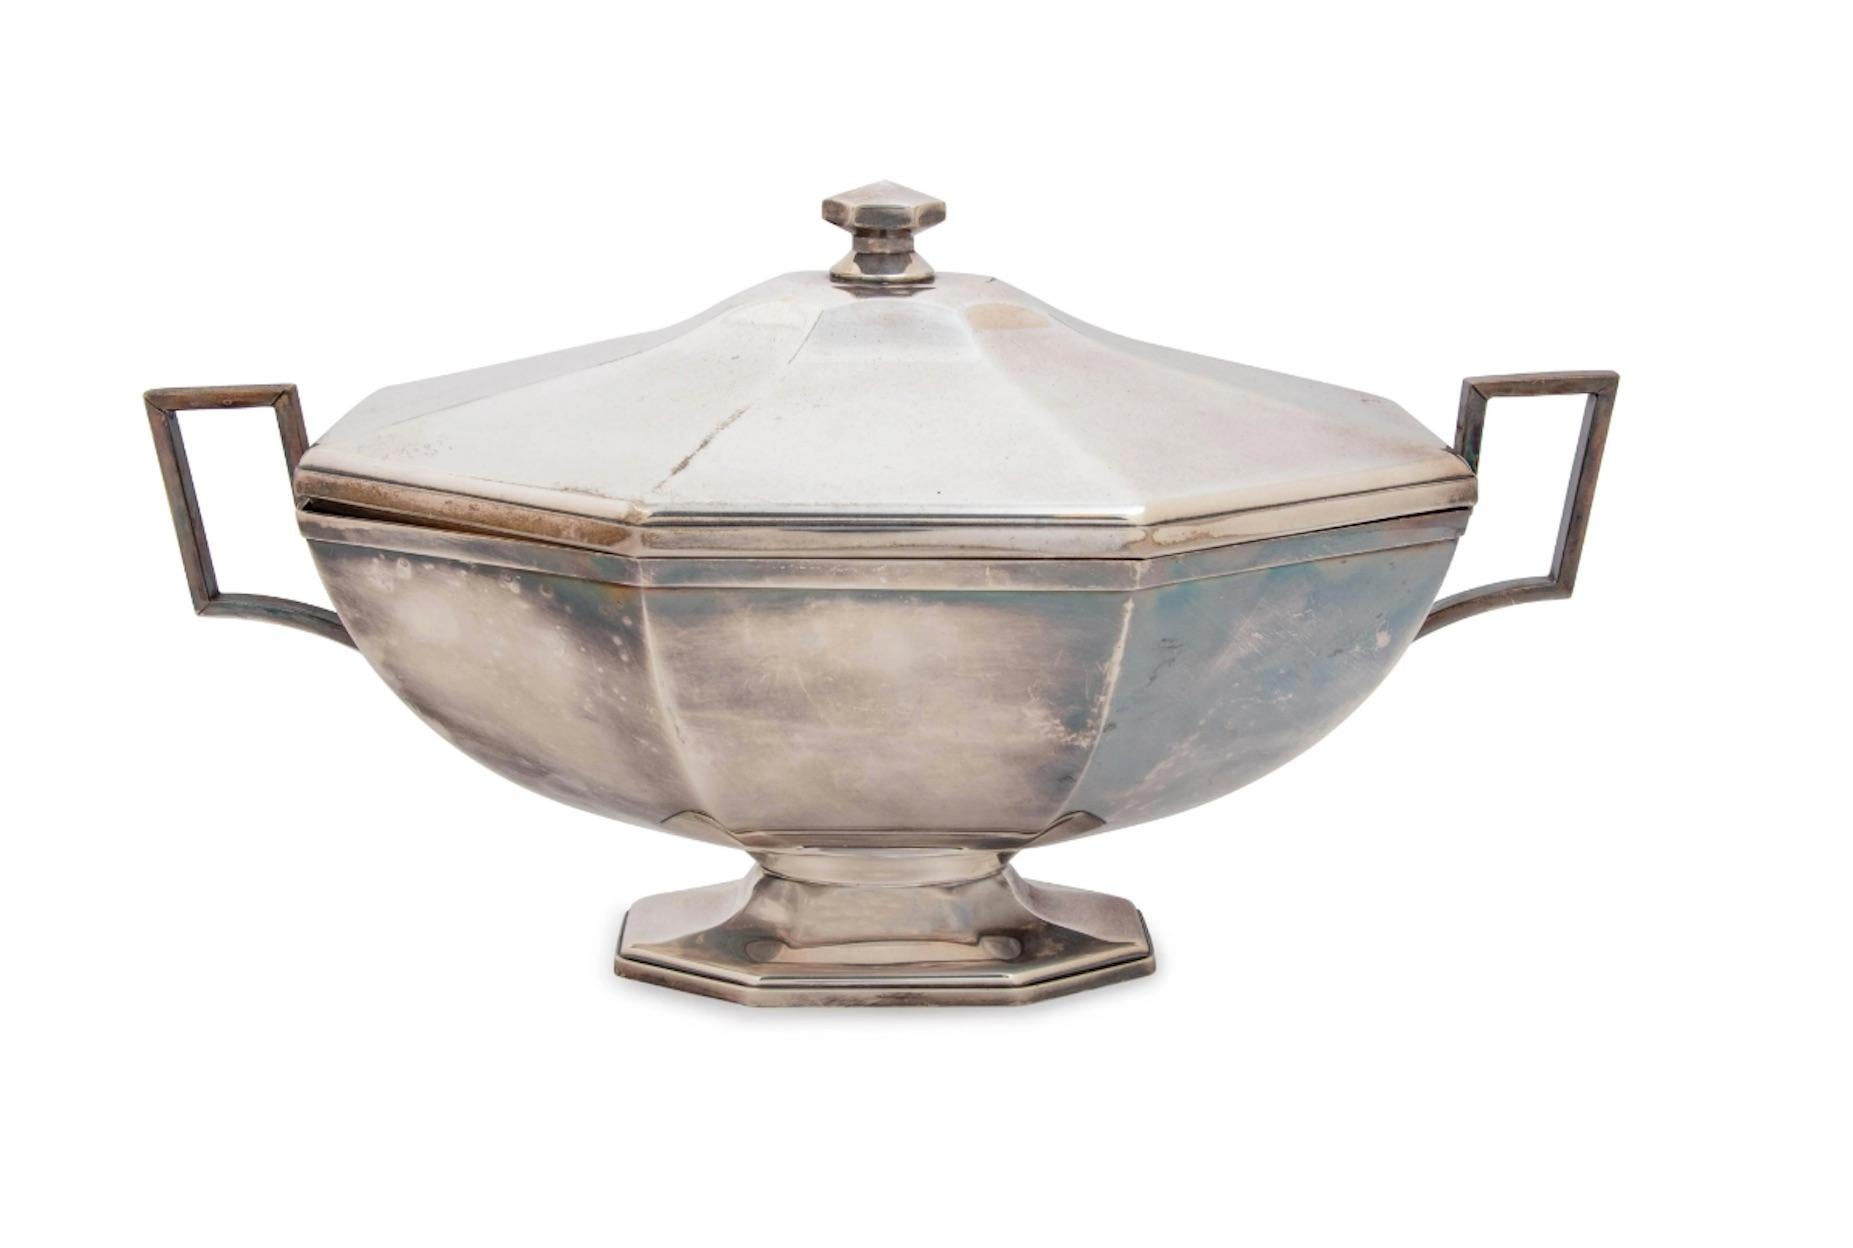 Georgian Silver Plate Tureen, Great Scale, Form and Simplicity, a Deffinate Statement